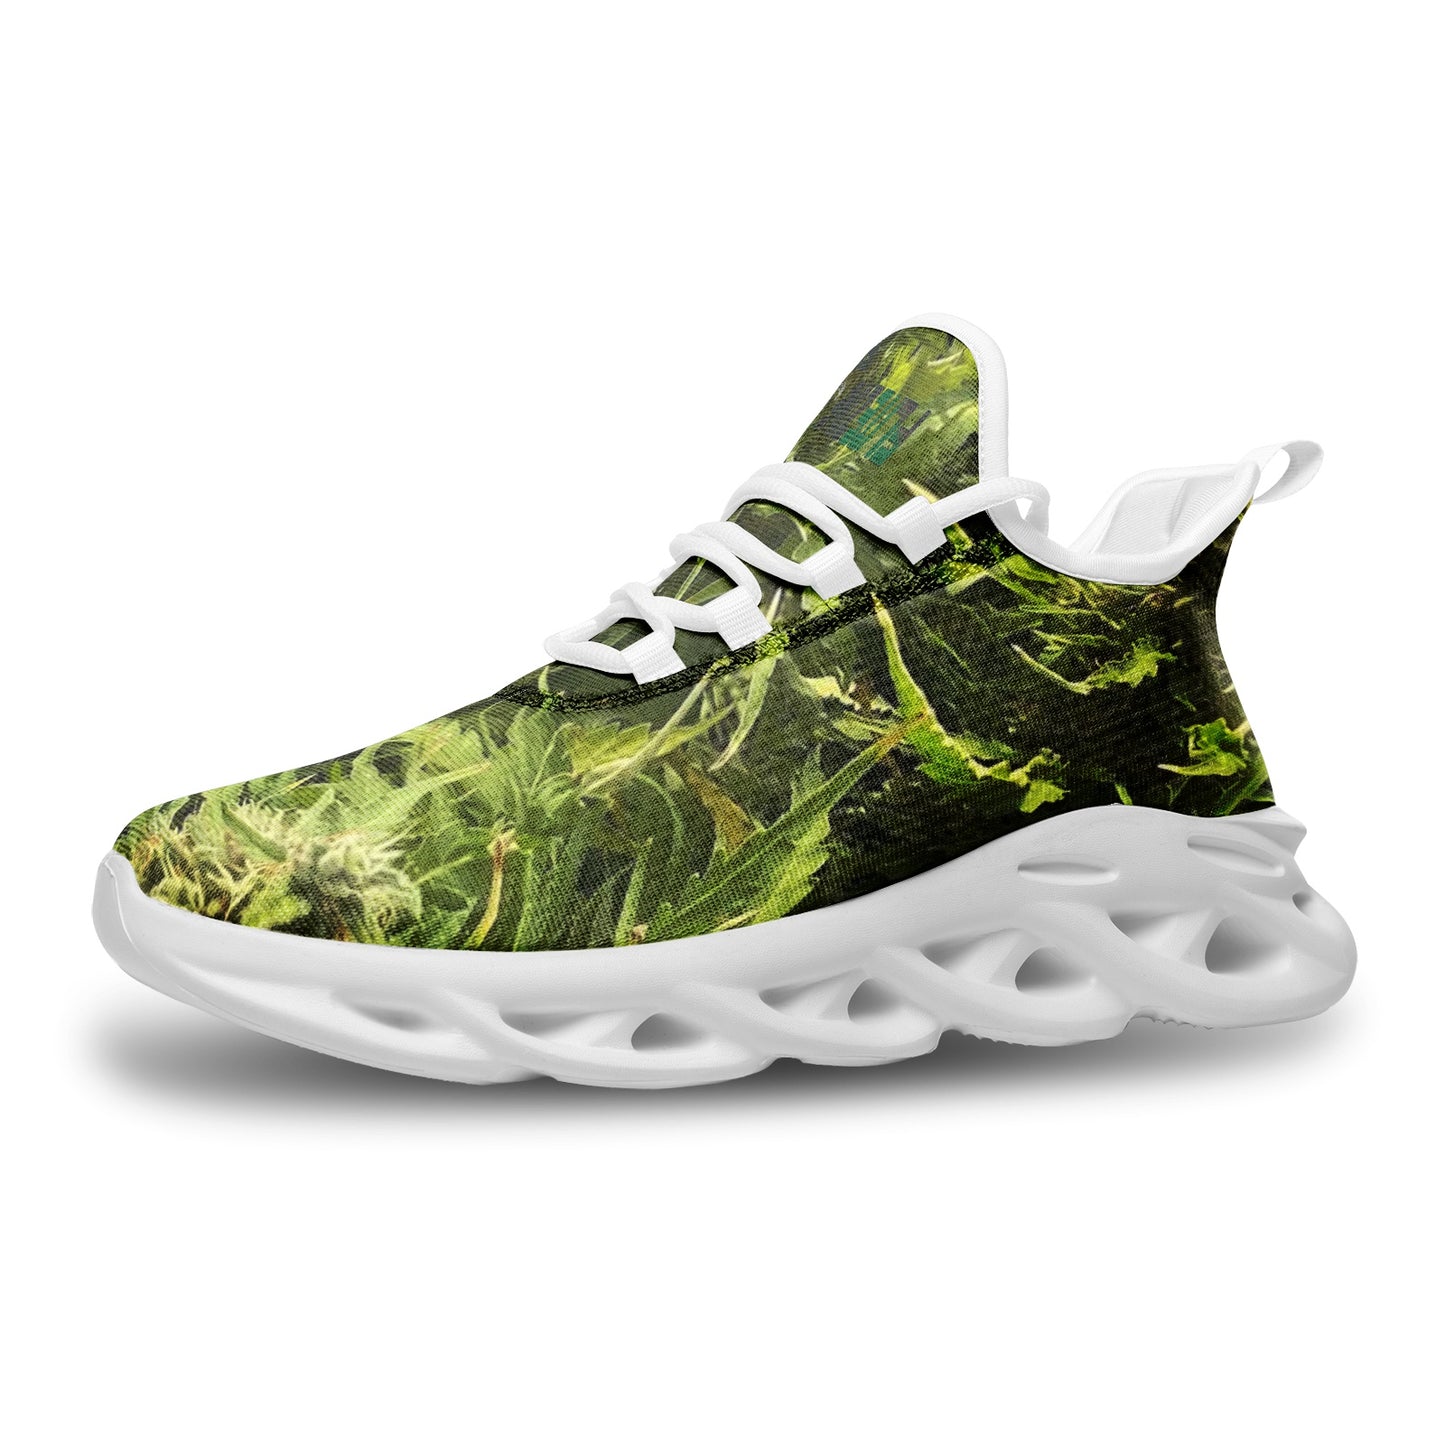 FZ Unisex Bounce Mesh Weed Knit Sneakers